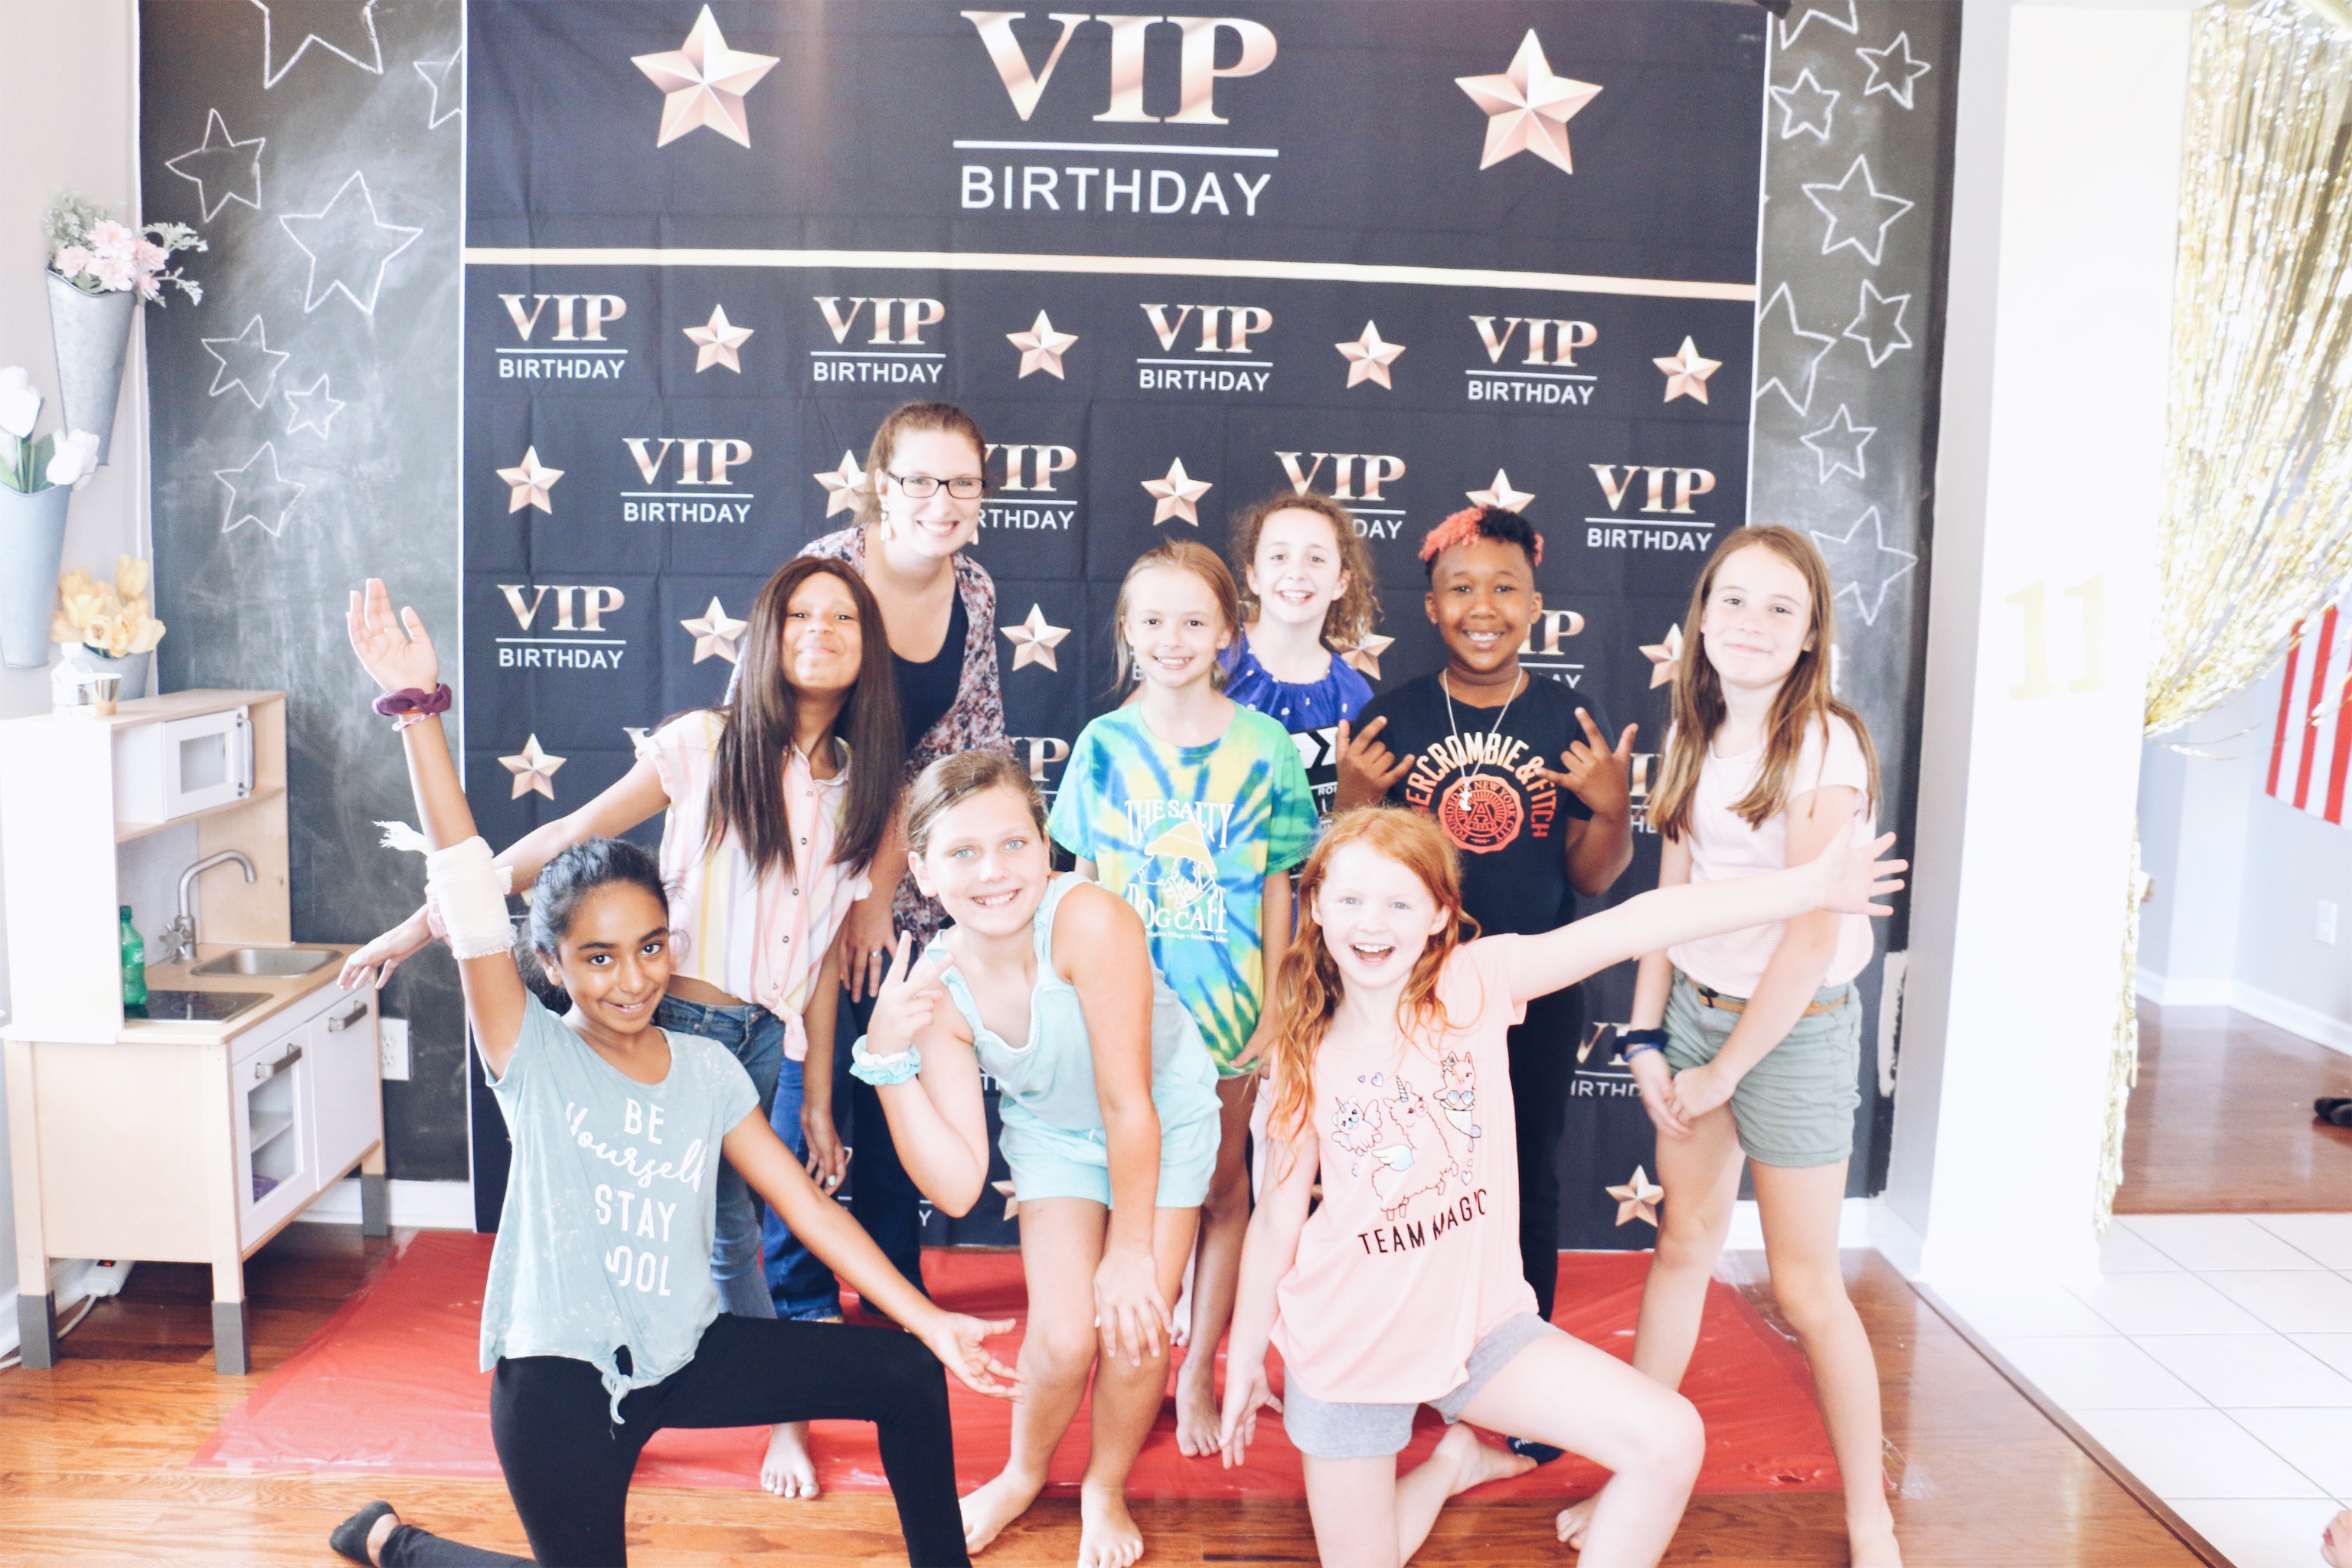 Sophia's 11th Birthday Party – Hollywood Movie Theme! – At Home With Natalie